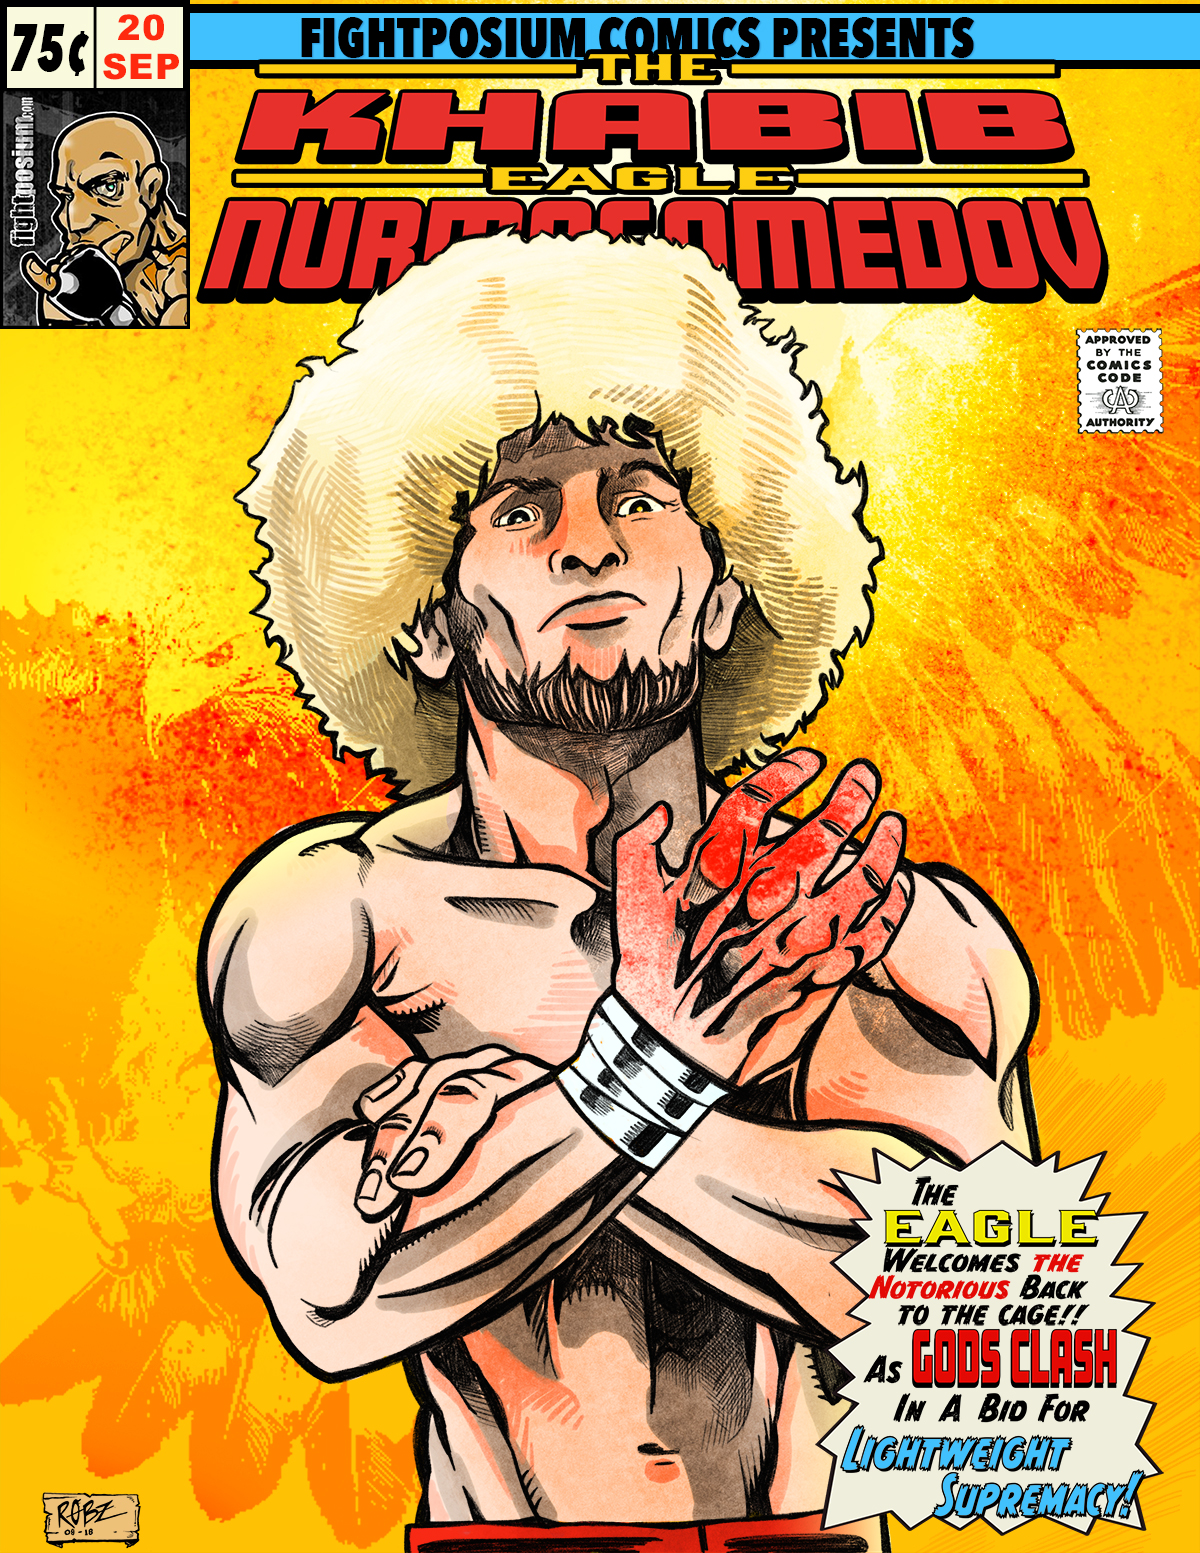 Read more about the article Khabib “The Eagle” Nurmagomedov – The Eagle Welcomes The Notorious Back to the Cage!